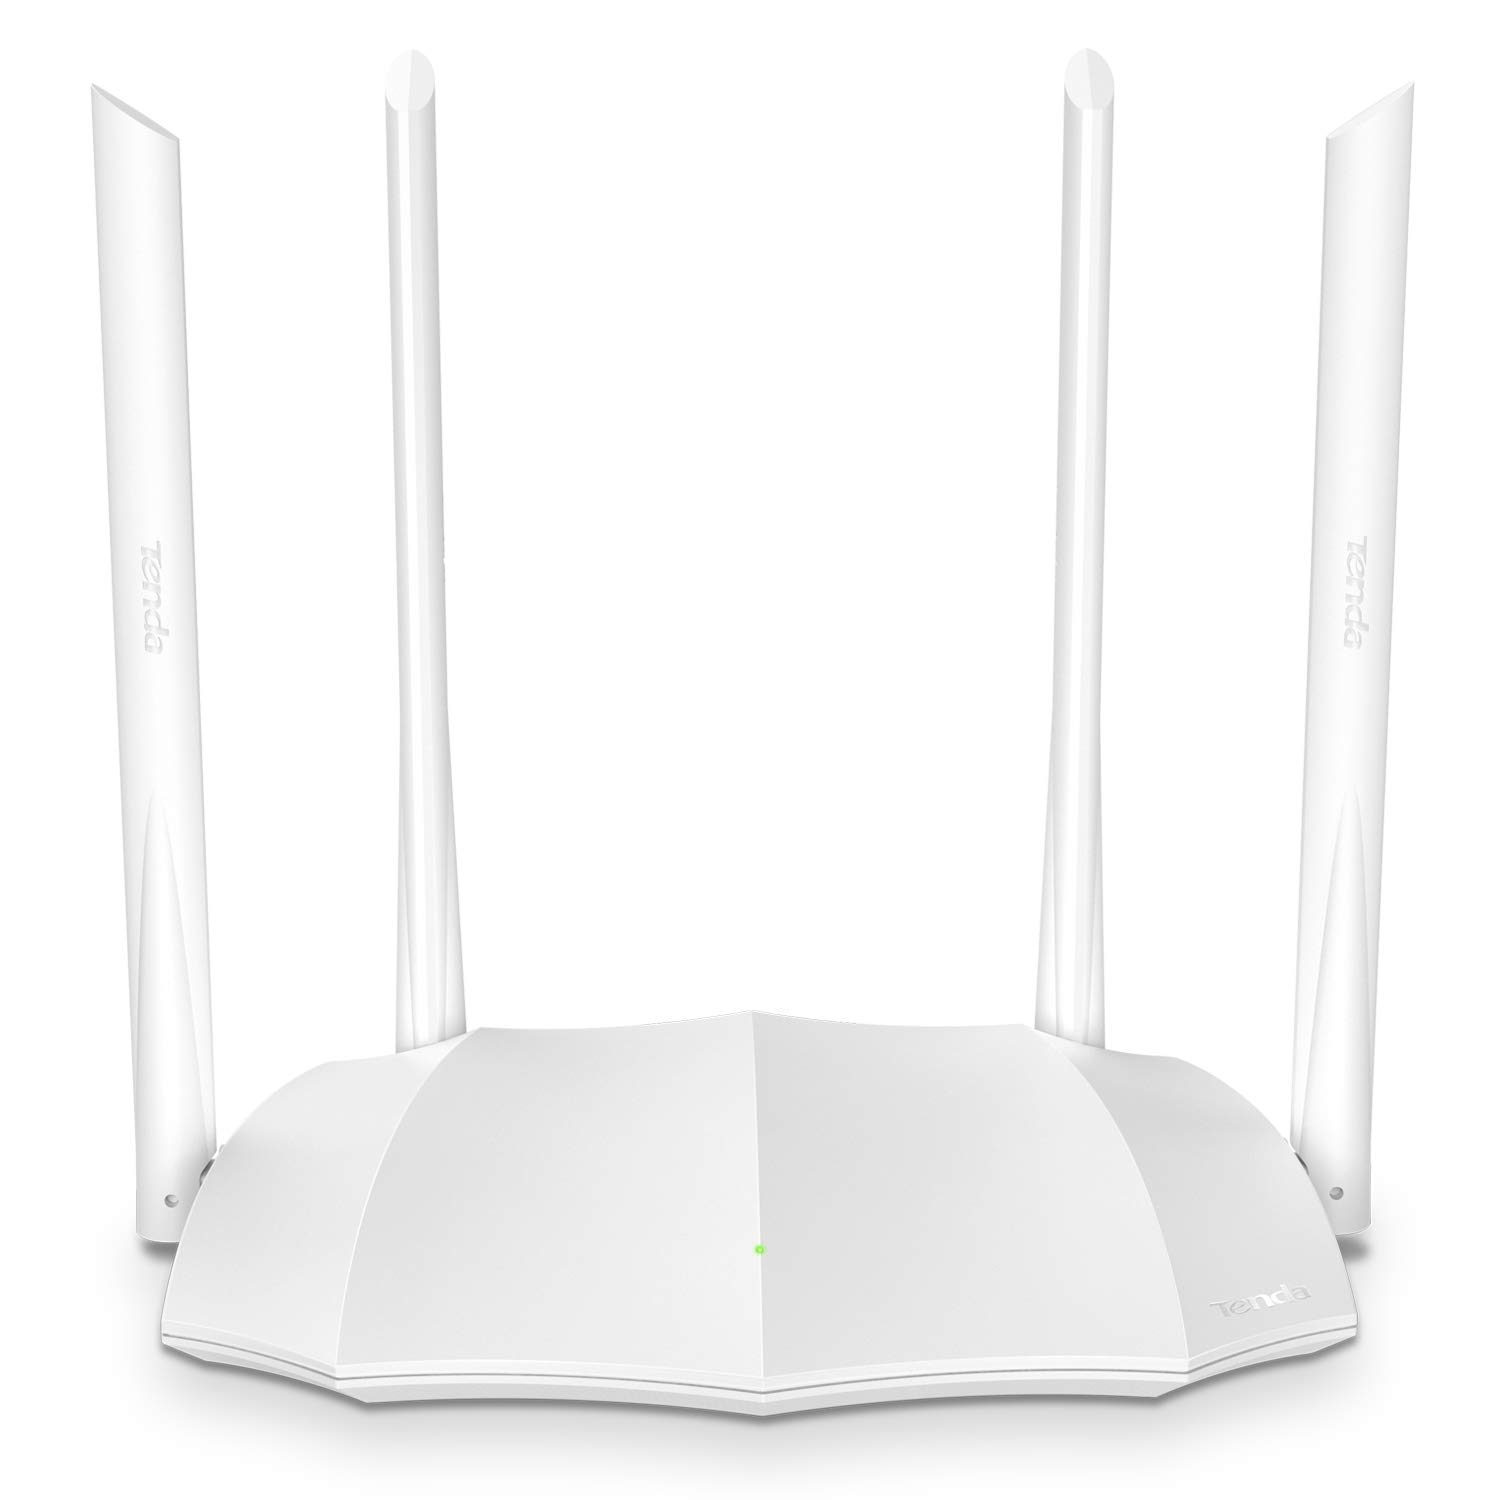 Tenda AC5 V3 AC1200 Wireless Dual Band WiFi Router,Speed Up to 867Mbps/5GHz + 300Mbps/2.4GHz, IPV6, Parental Control, Guest Network